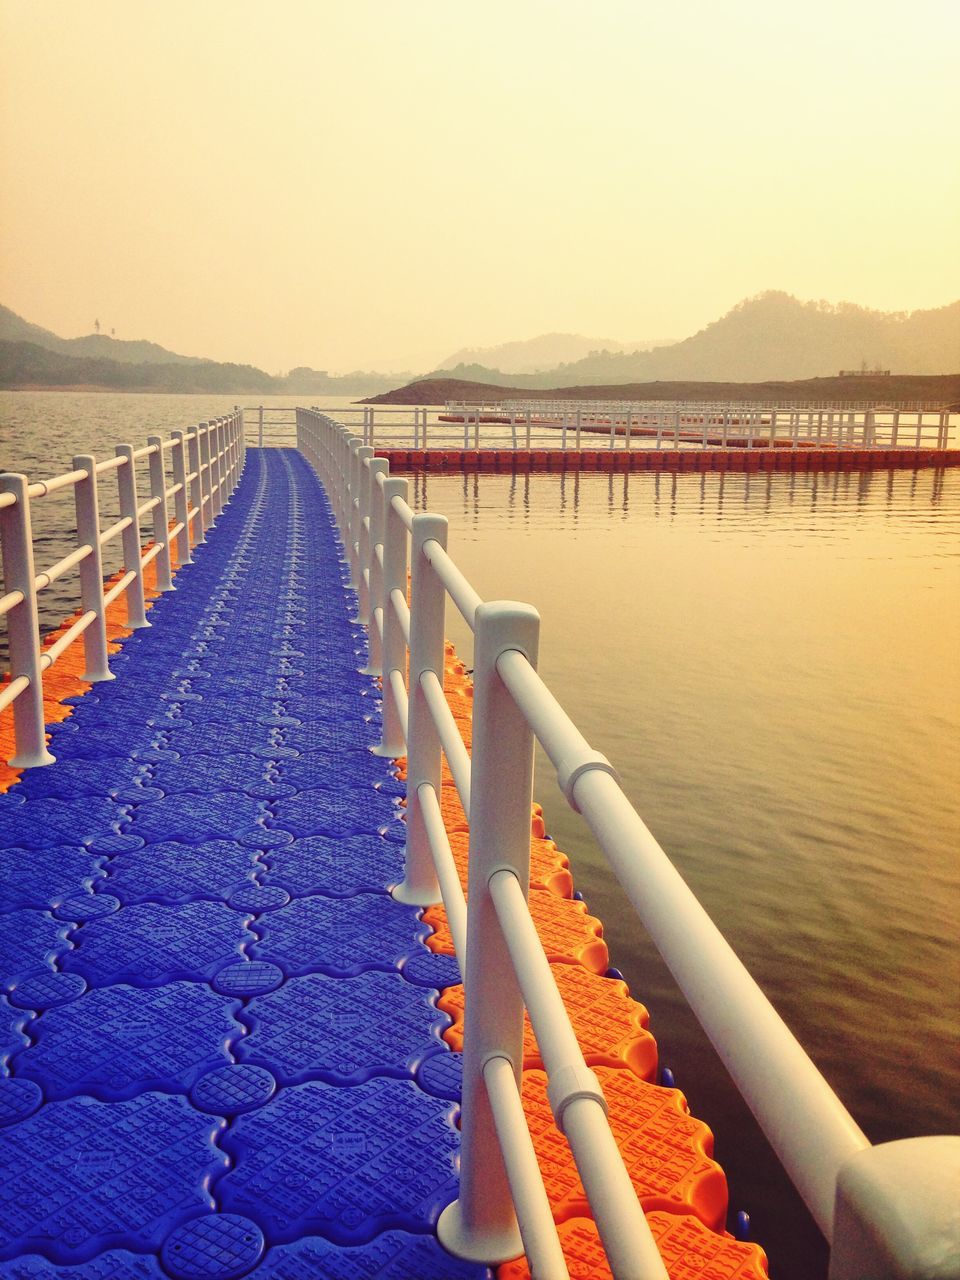 water, railing, the way forward, tranquility, clear sky, scenics, tranquil scene, diminishing perspective, nature, sea, beauty in nature, pier, transportation, bridge - man made structure, mountain, built structure, river, sky, outdoors, vanishing point